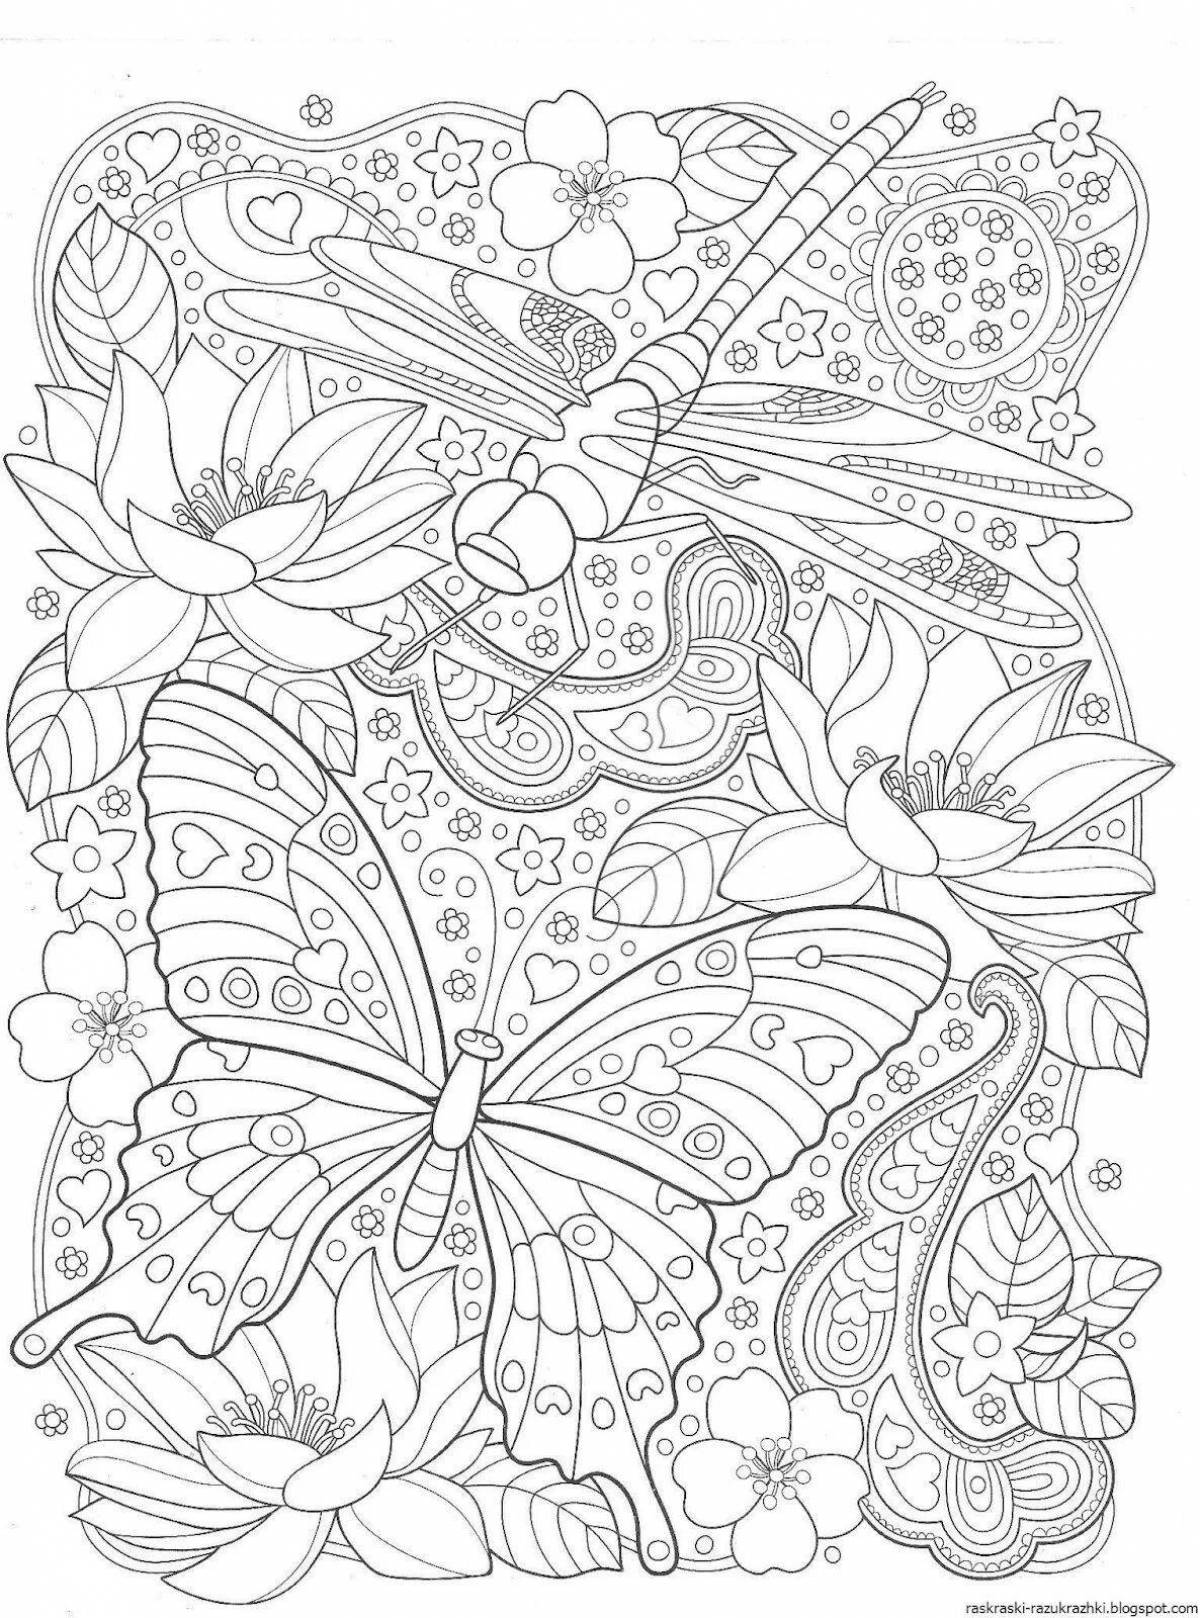 Joyful coloring relaxation antistress for adults